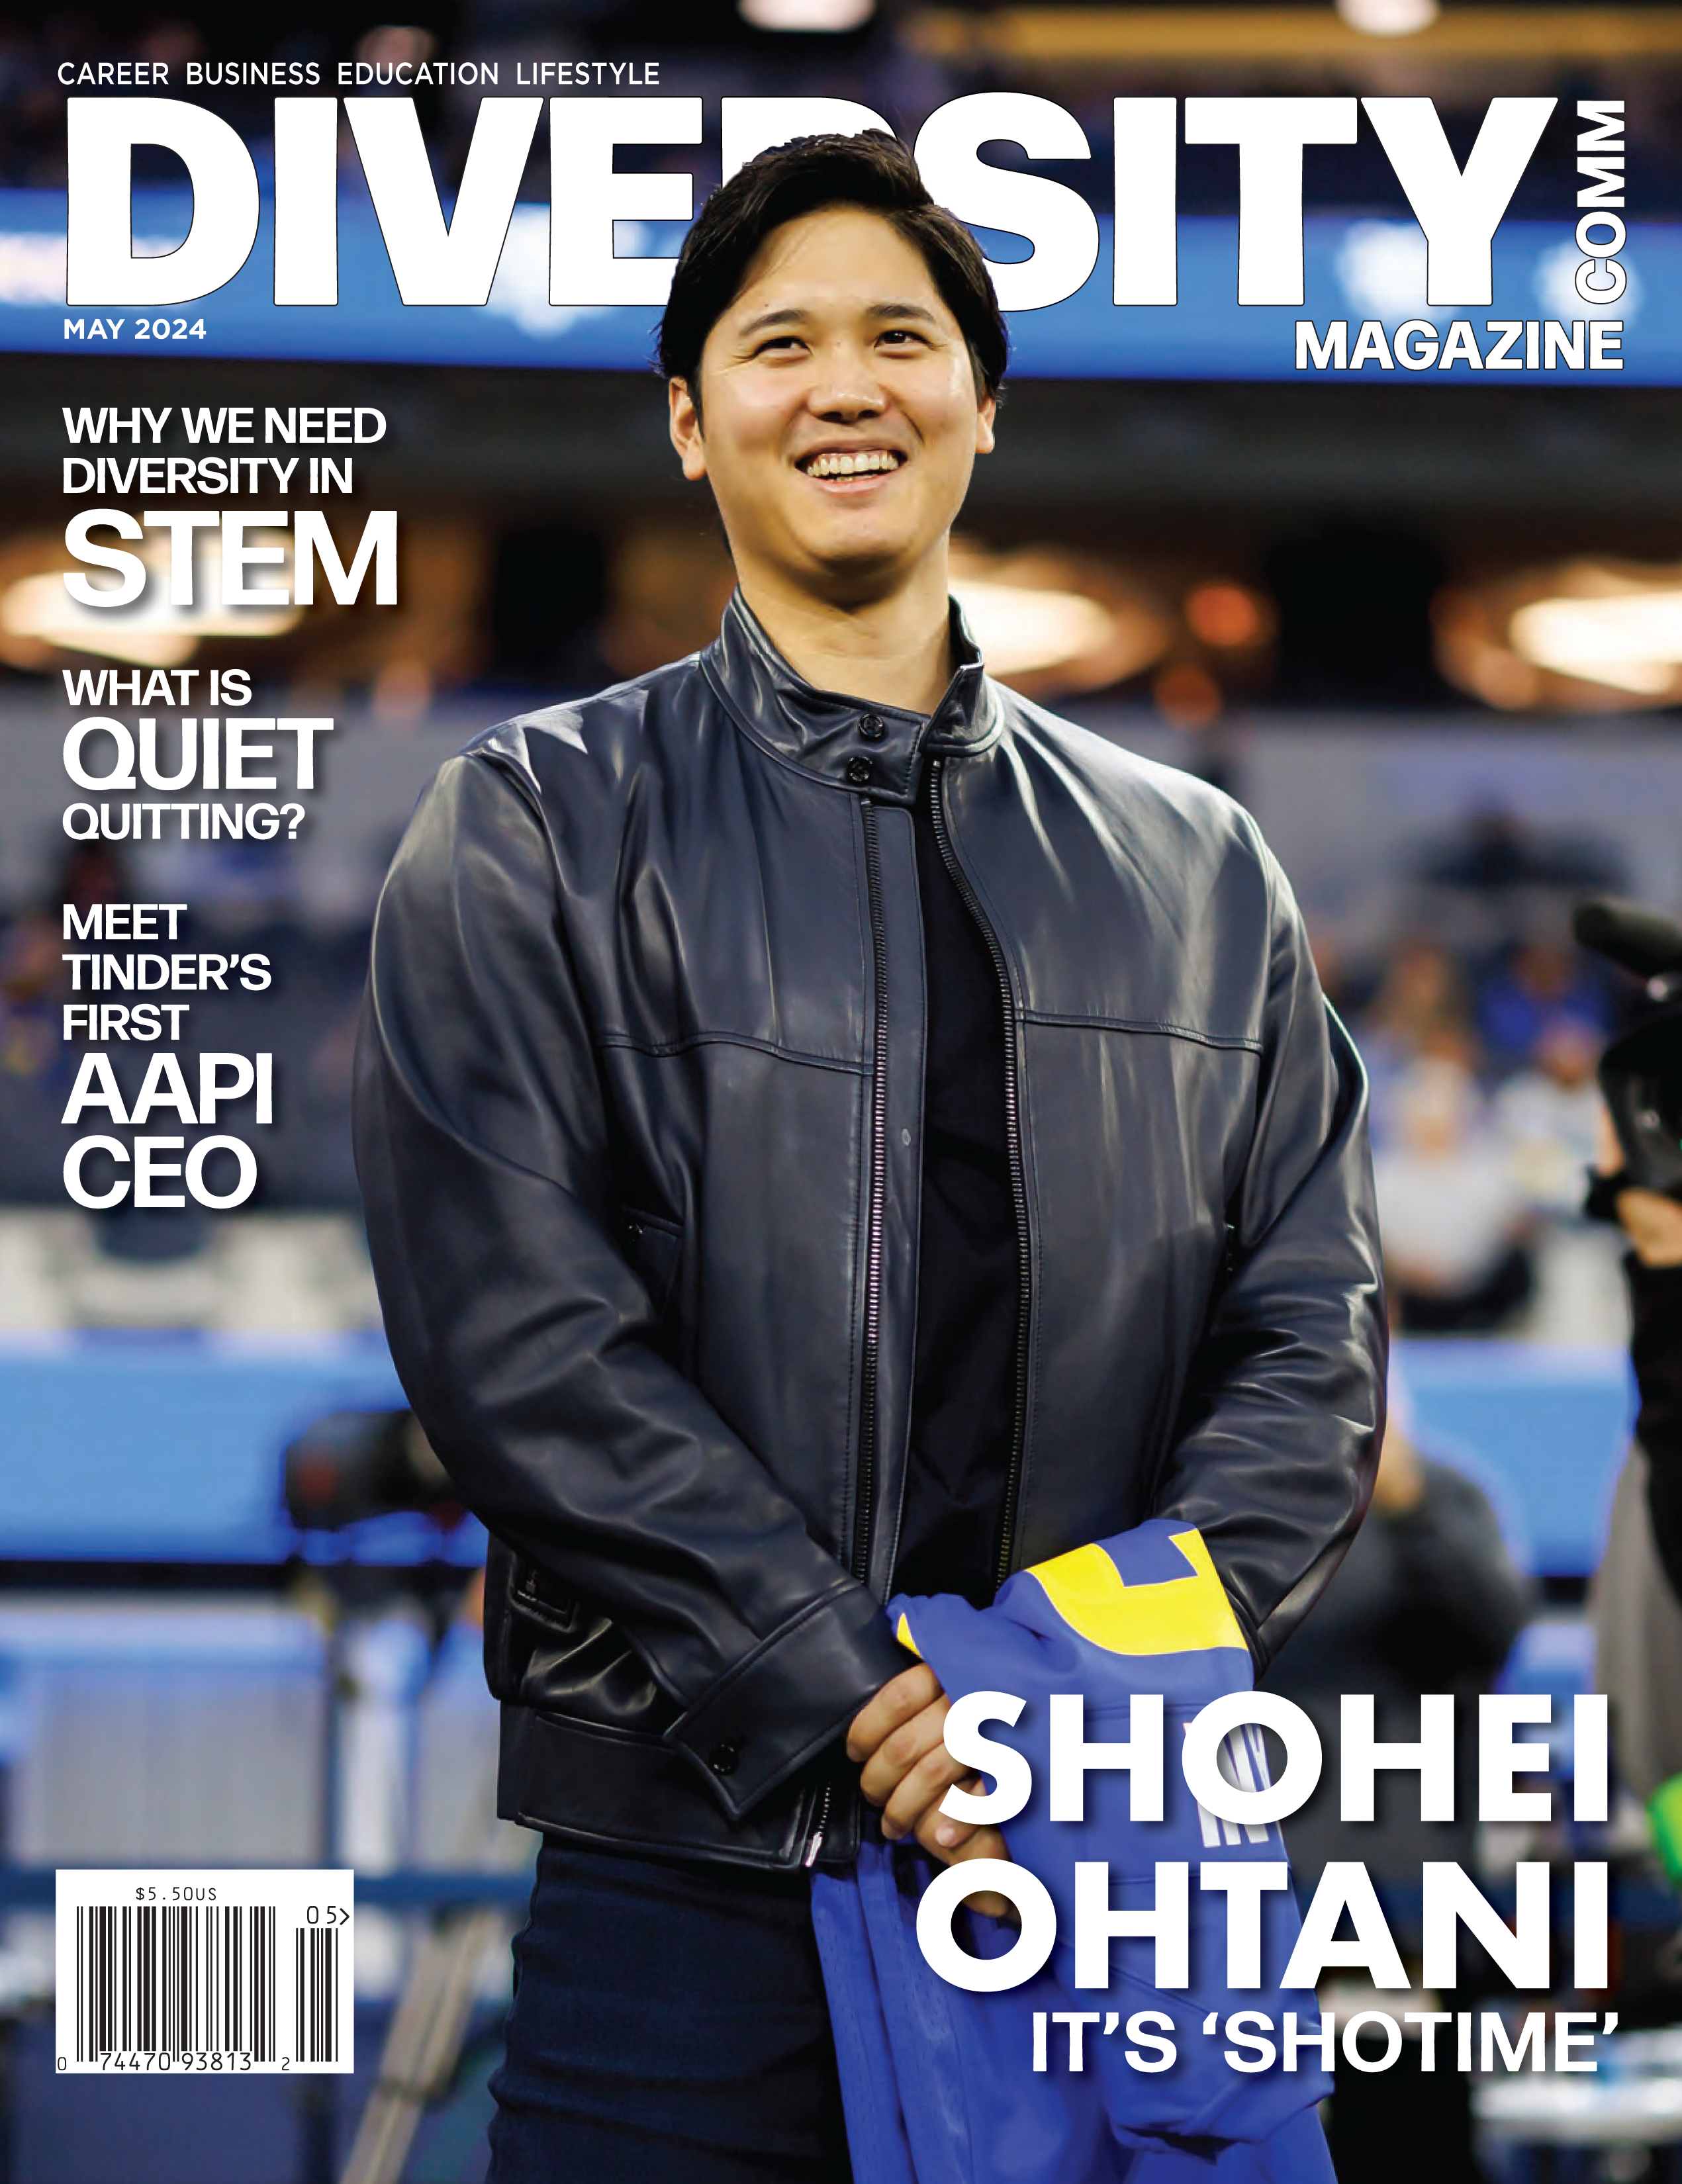 Shohei Ohtani on the cover smiling